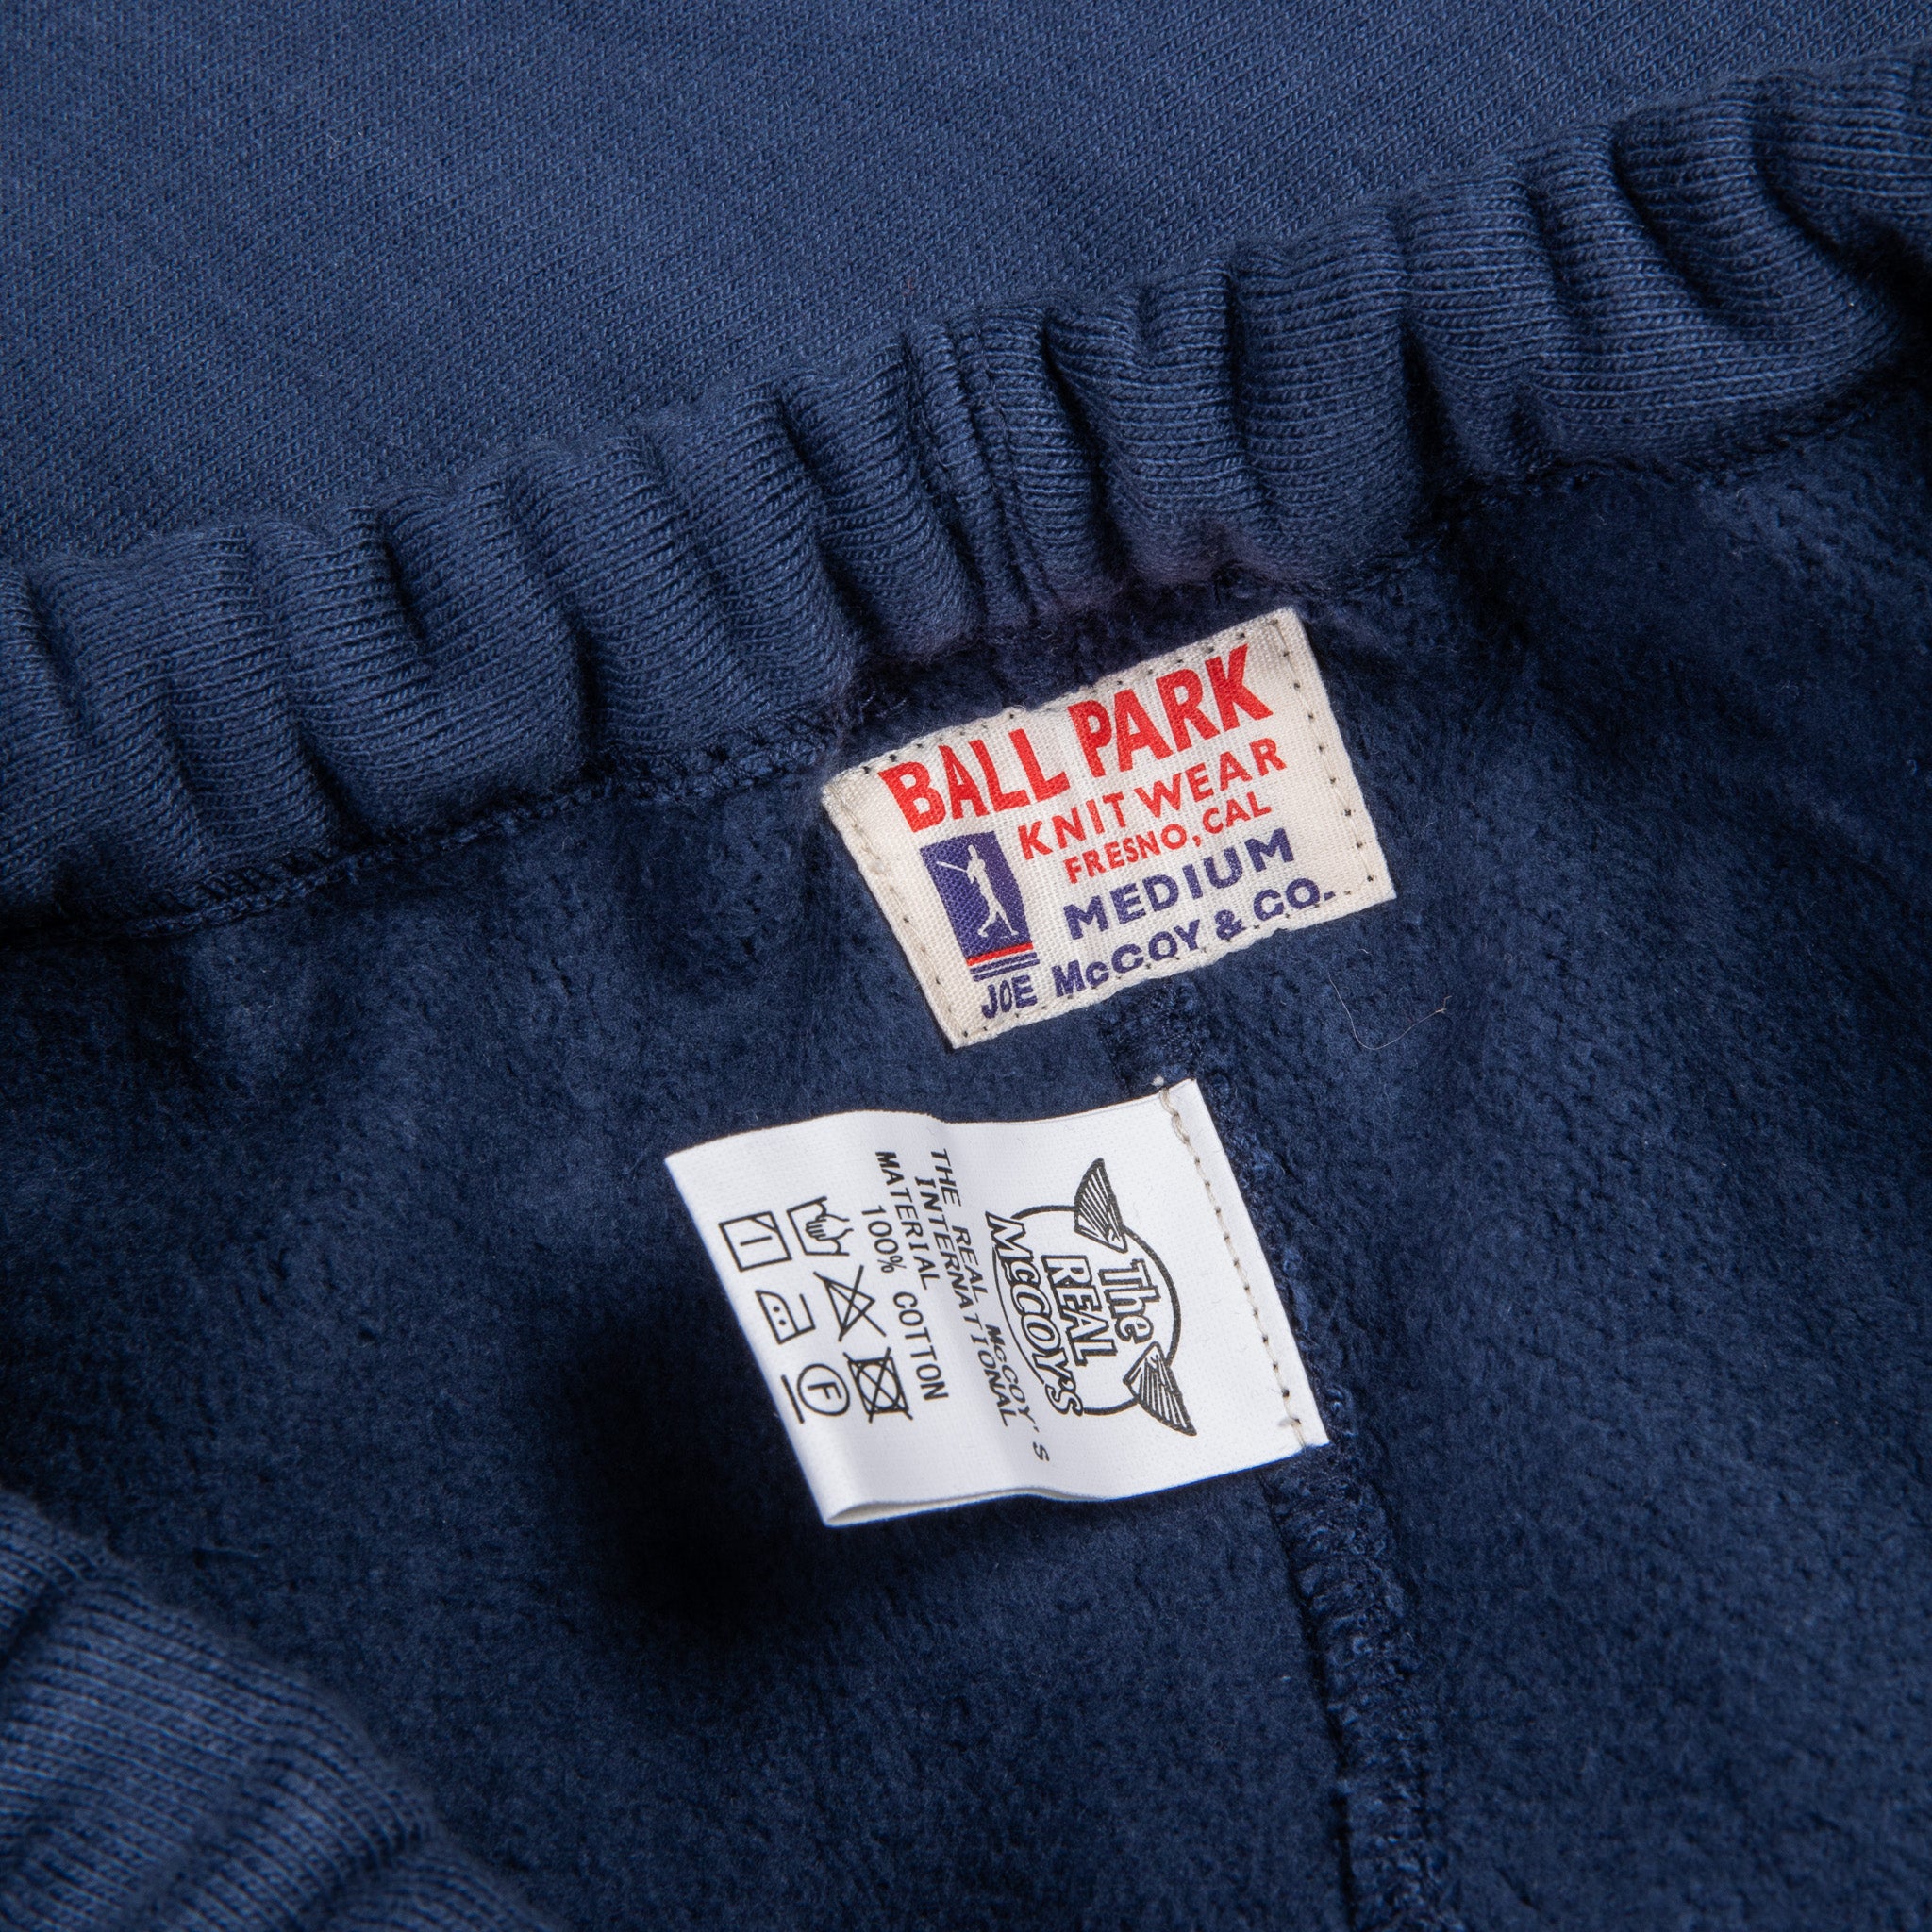 The Real McCoy's Heavyweight Sweatpants Navy